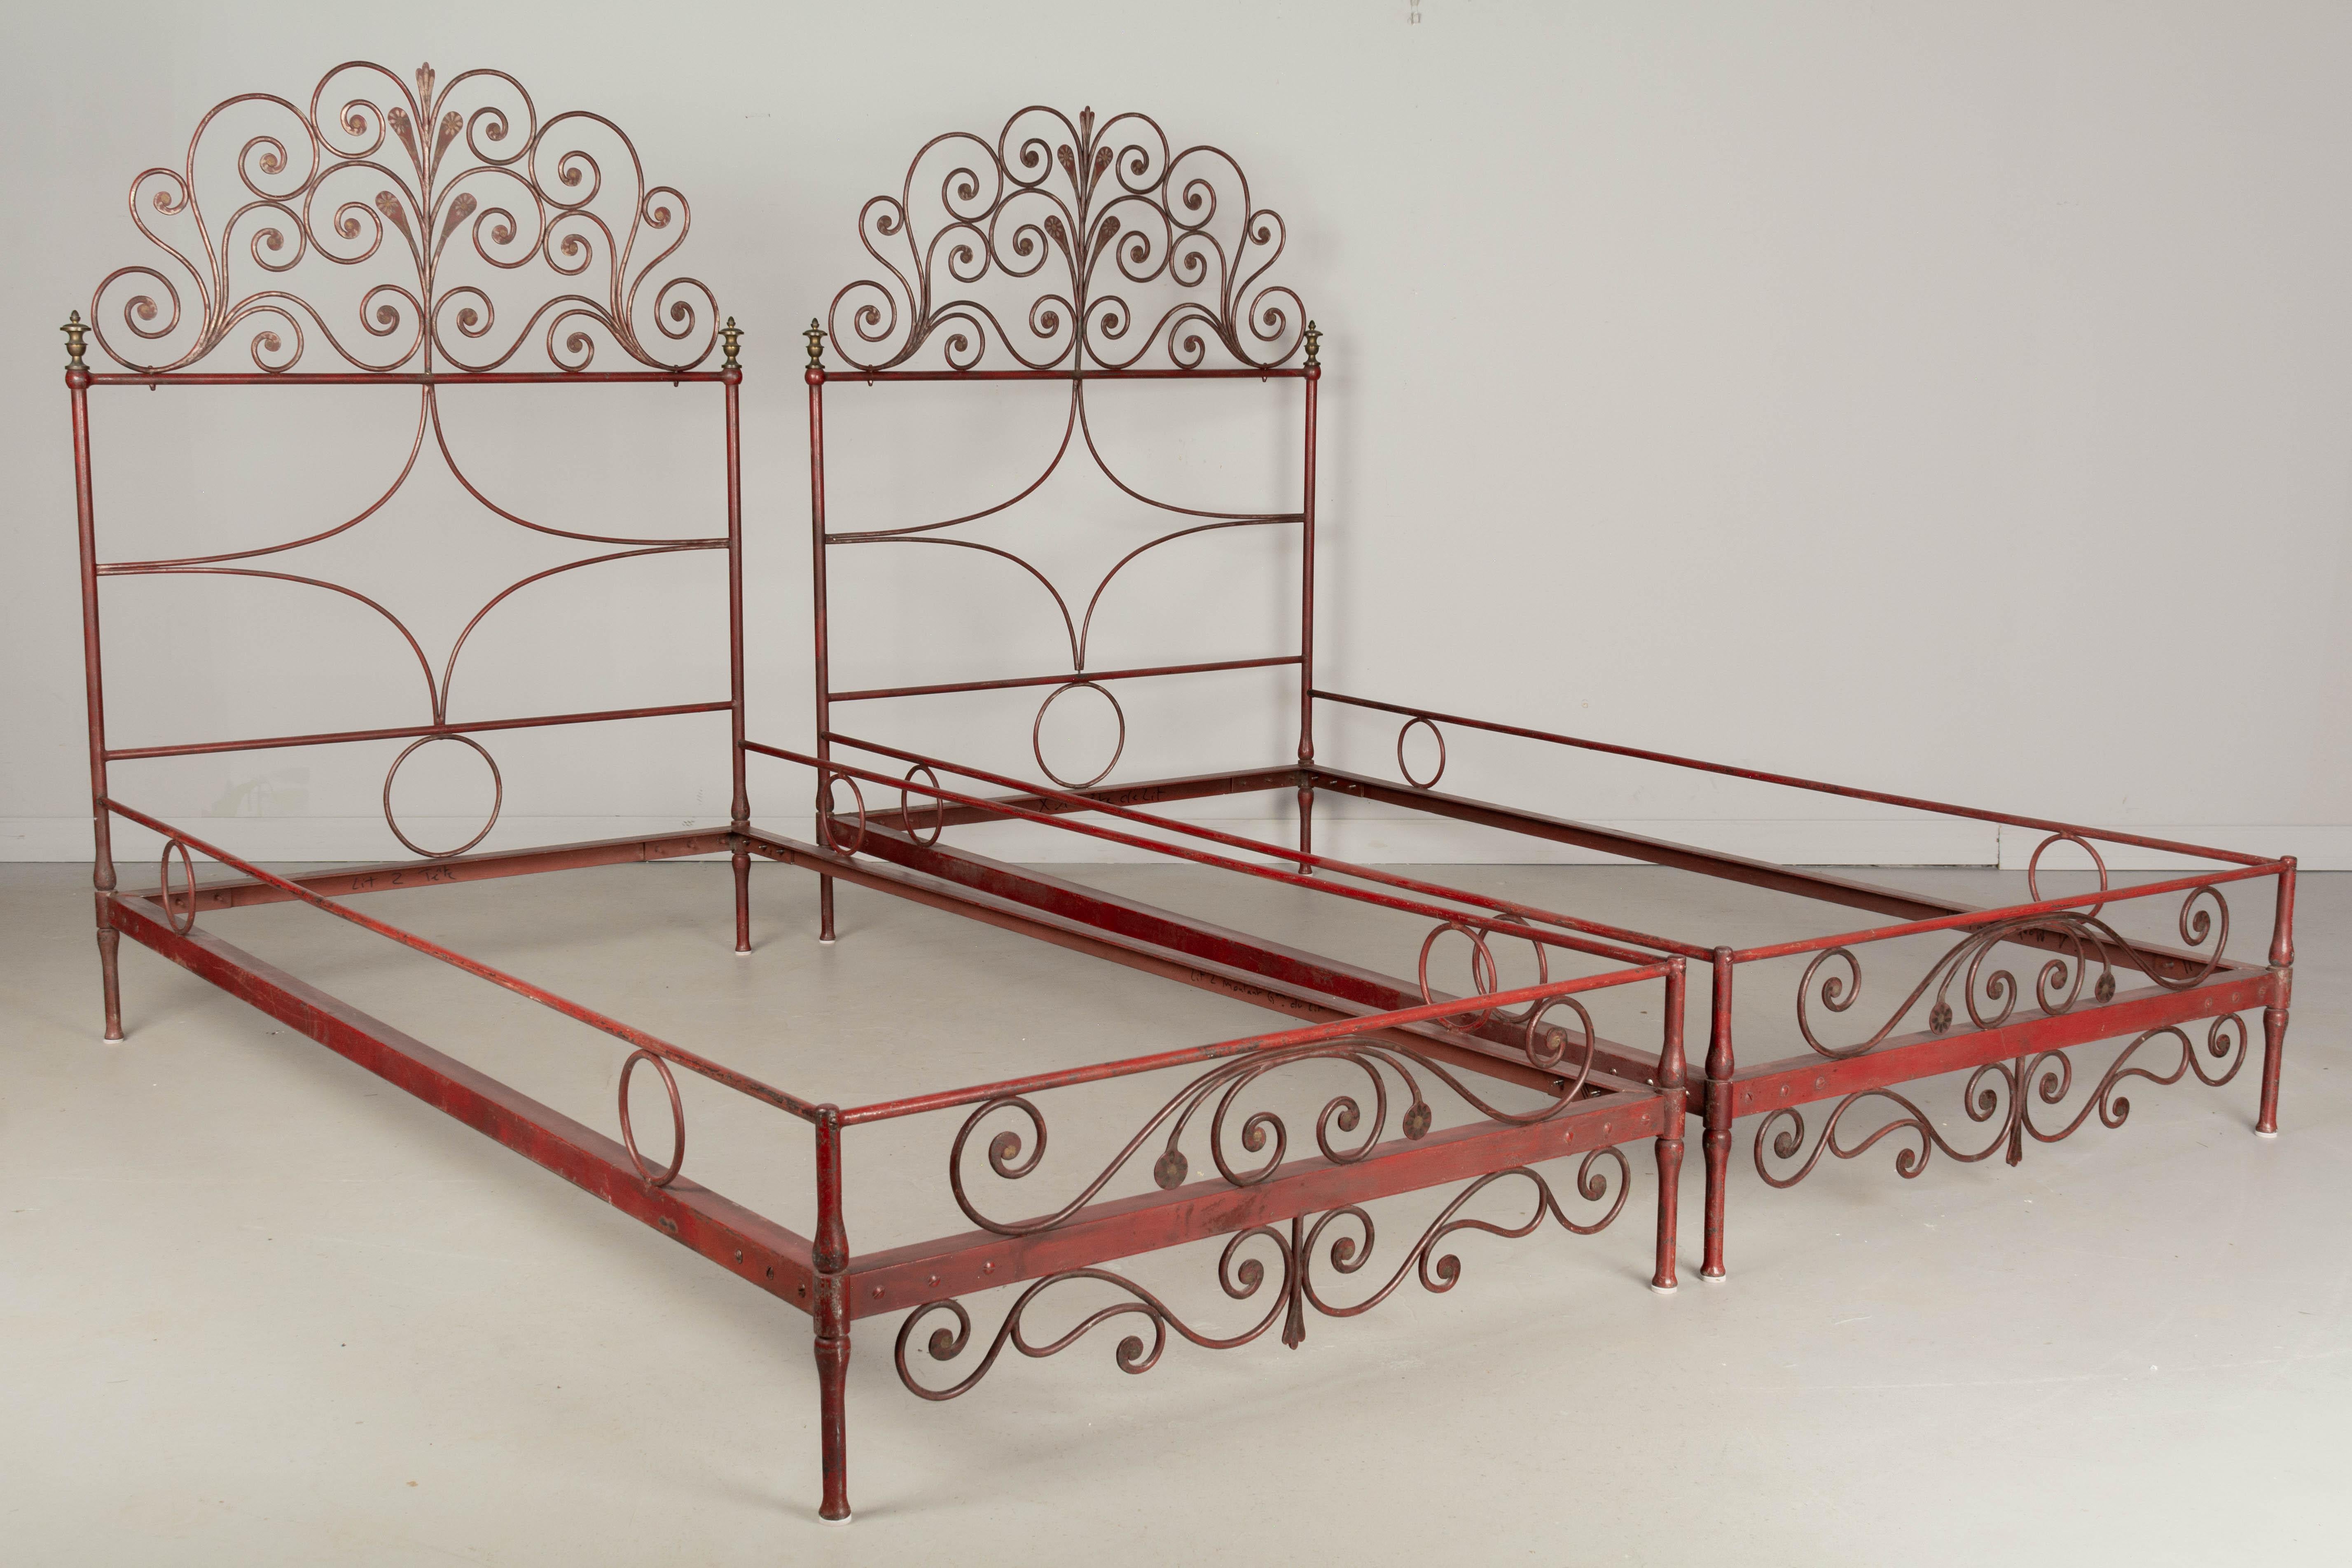 A pair of French Napoleon III style iron bed frames with original red painted finish. Decorative wrought iron headboard and footboard accented with gold painted floral details. Cast brass finials. Minor paint loss. In good condition with nice